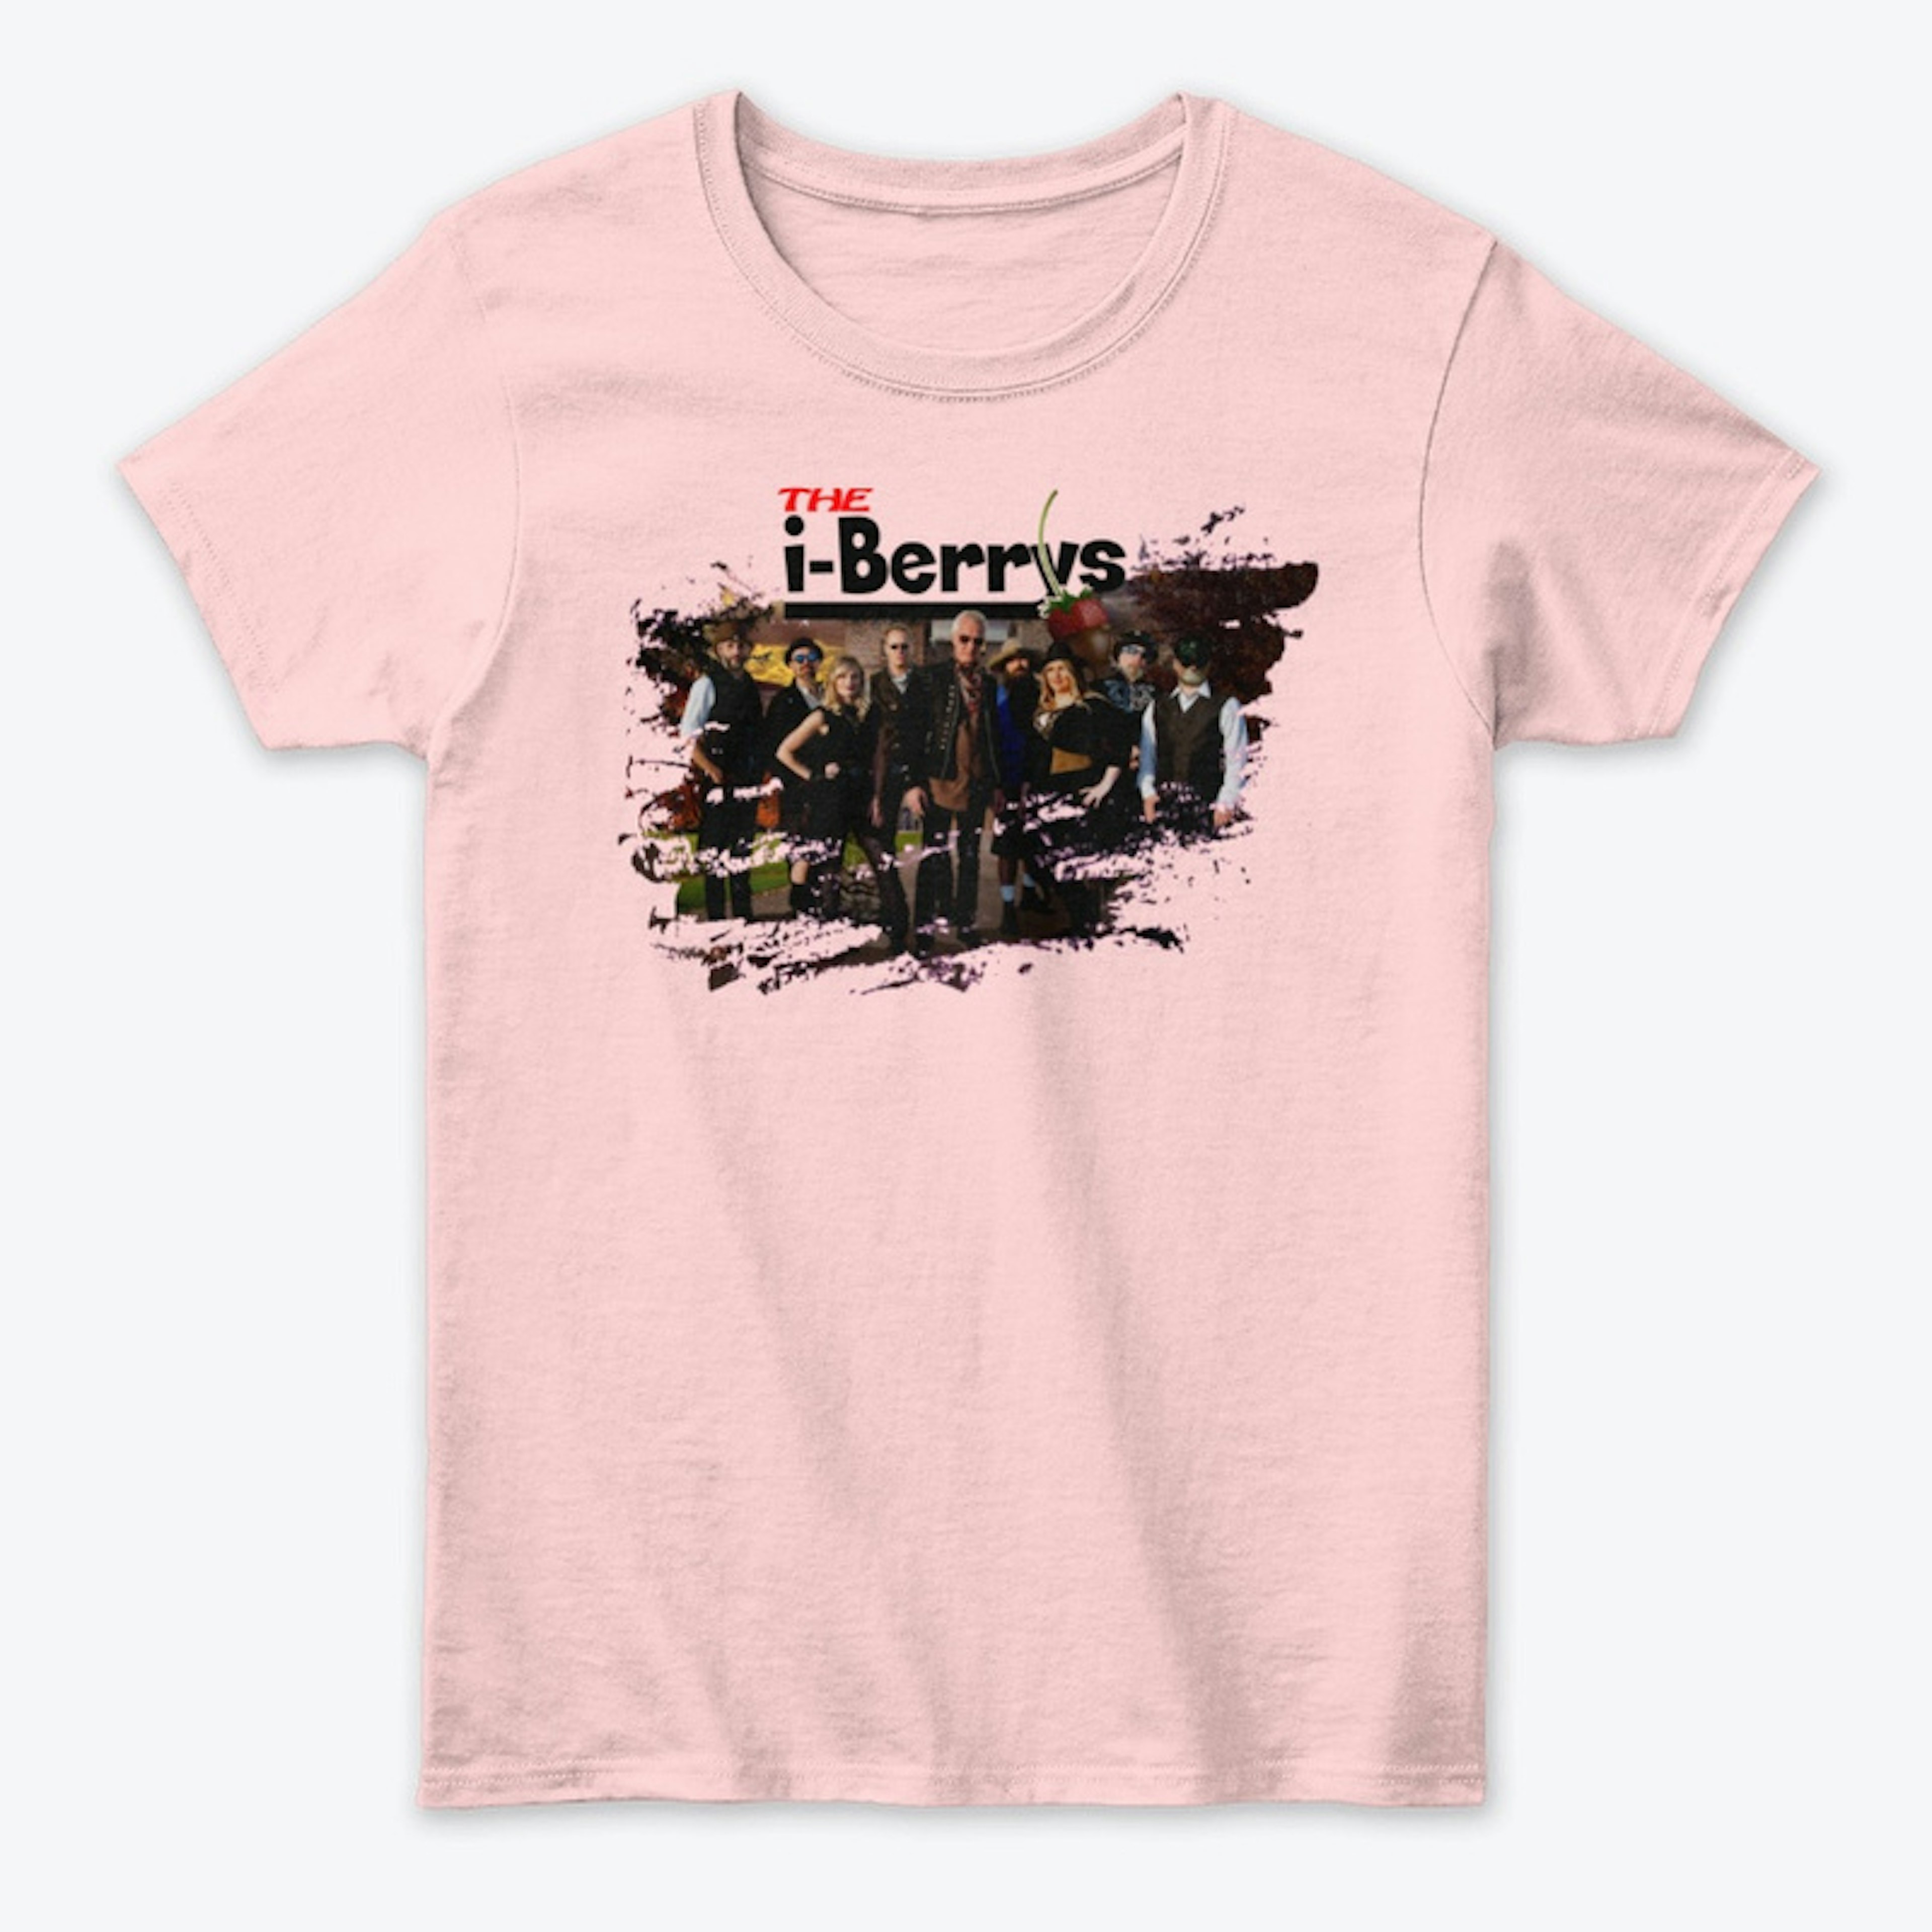 Women's Classic Tee with Group Photo